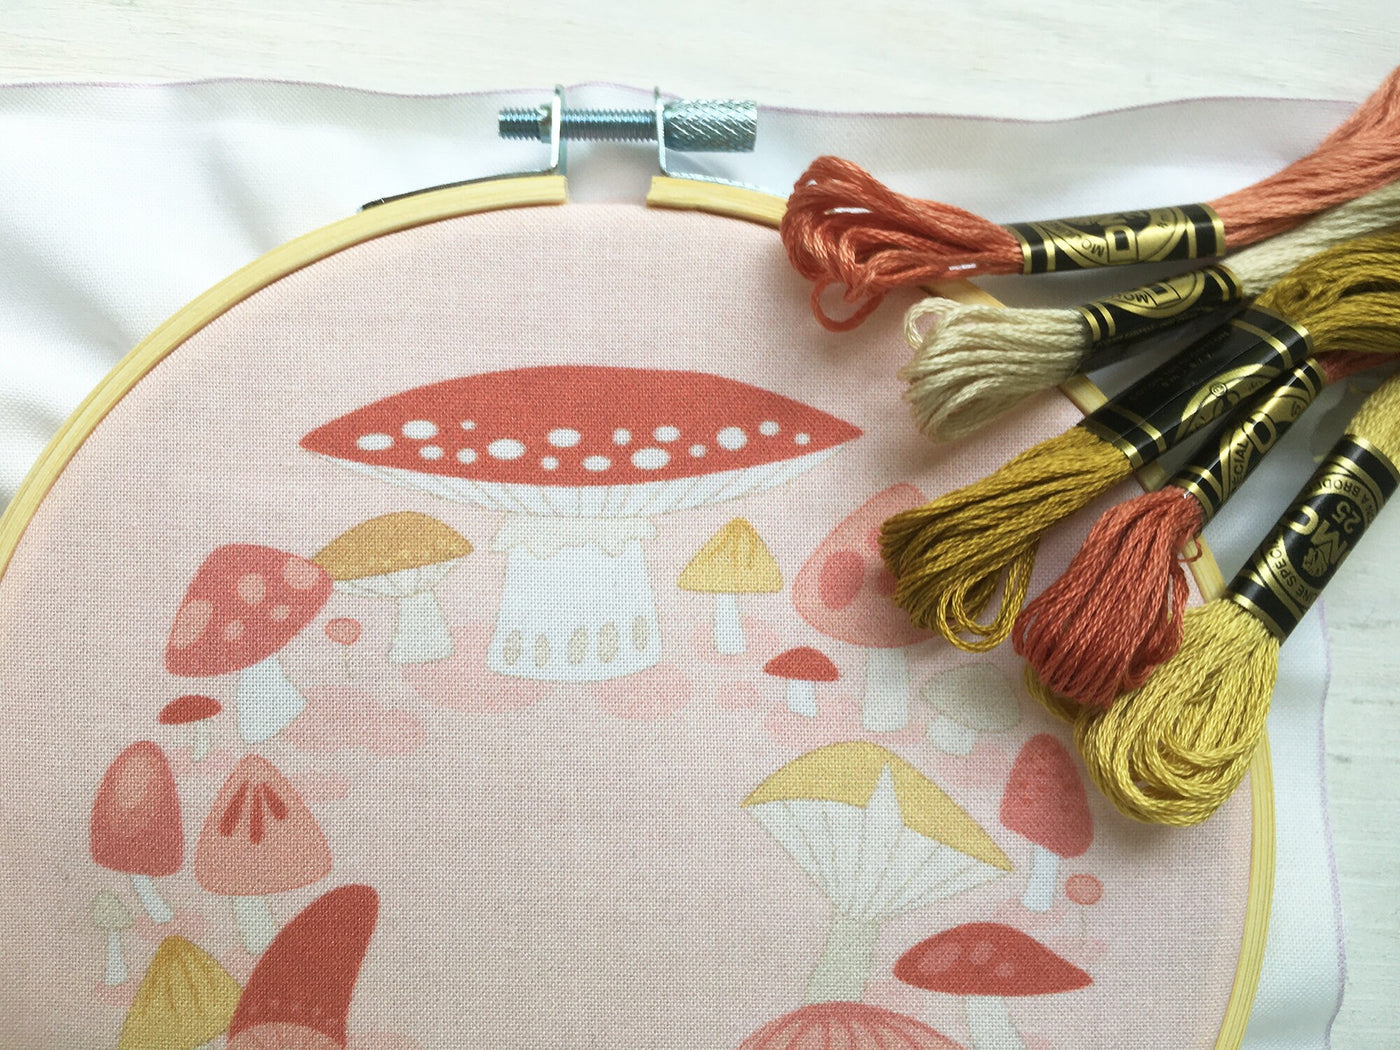 Embroidery Kit - Fairy Ring